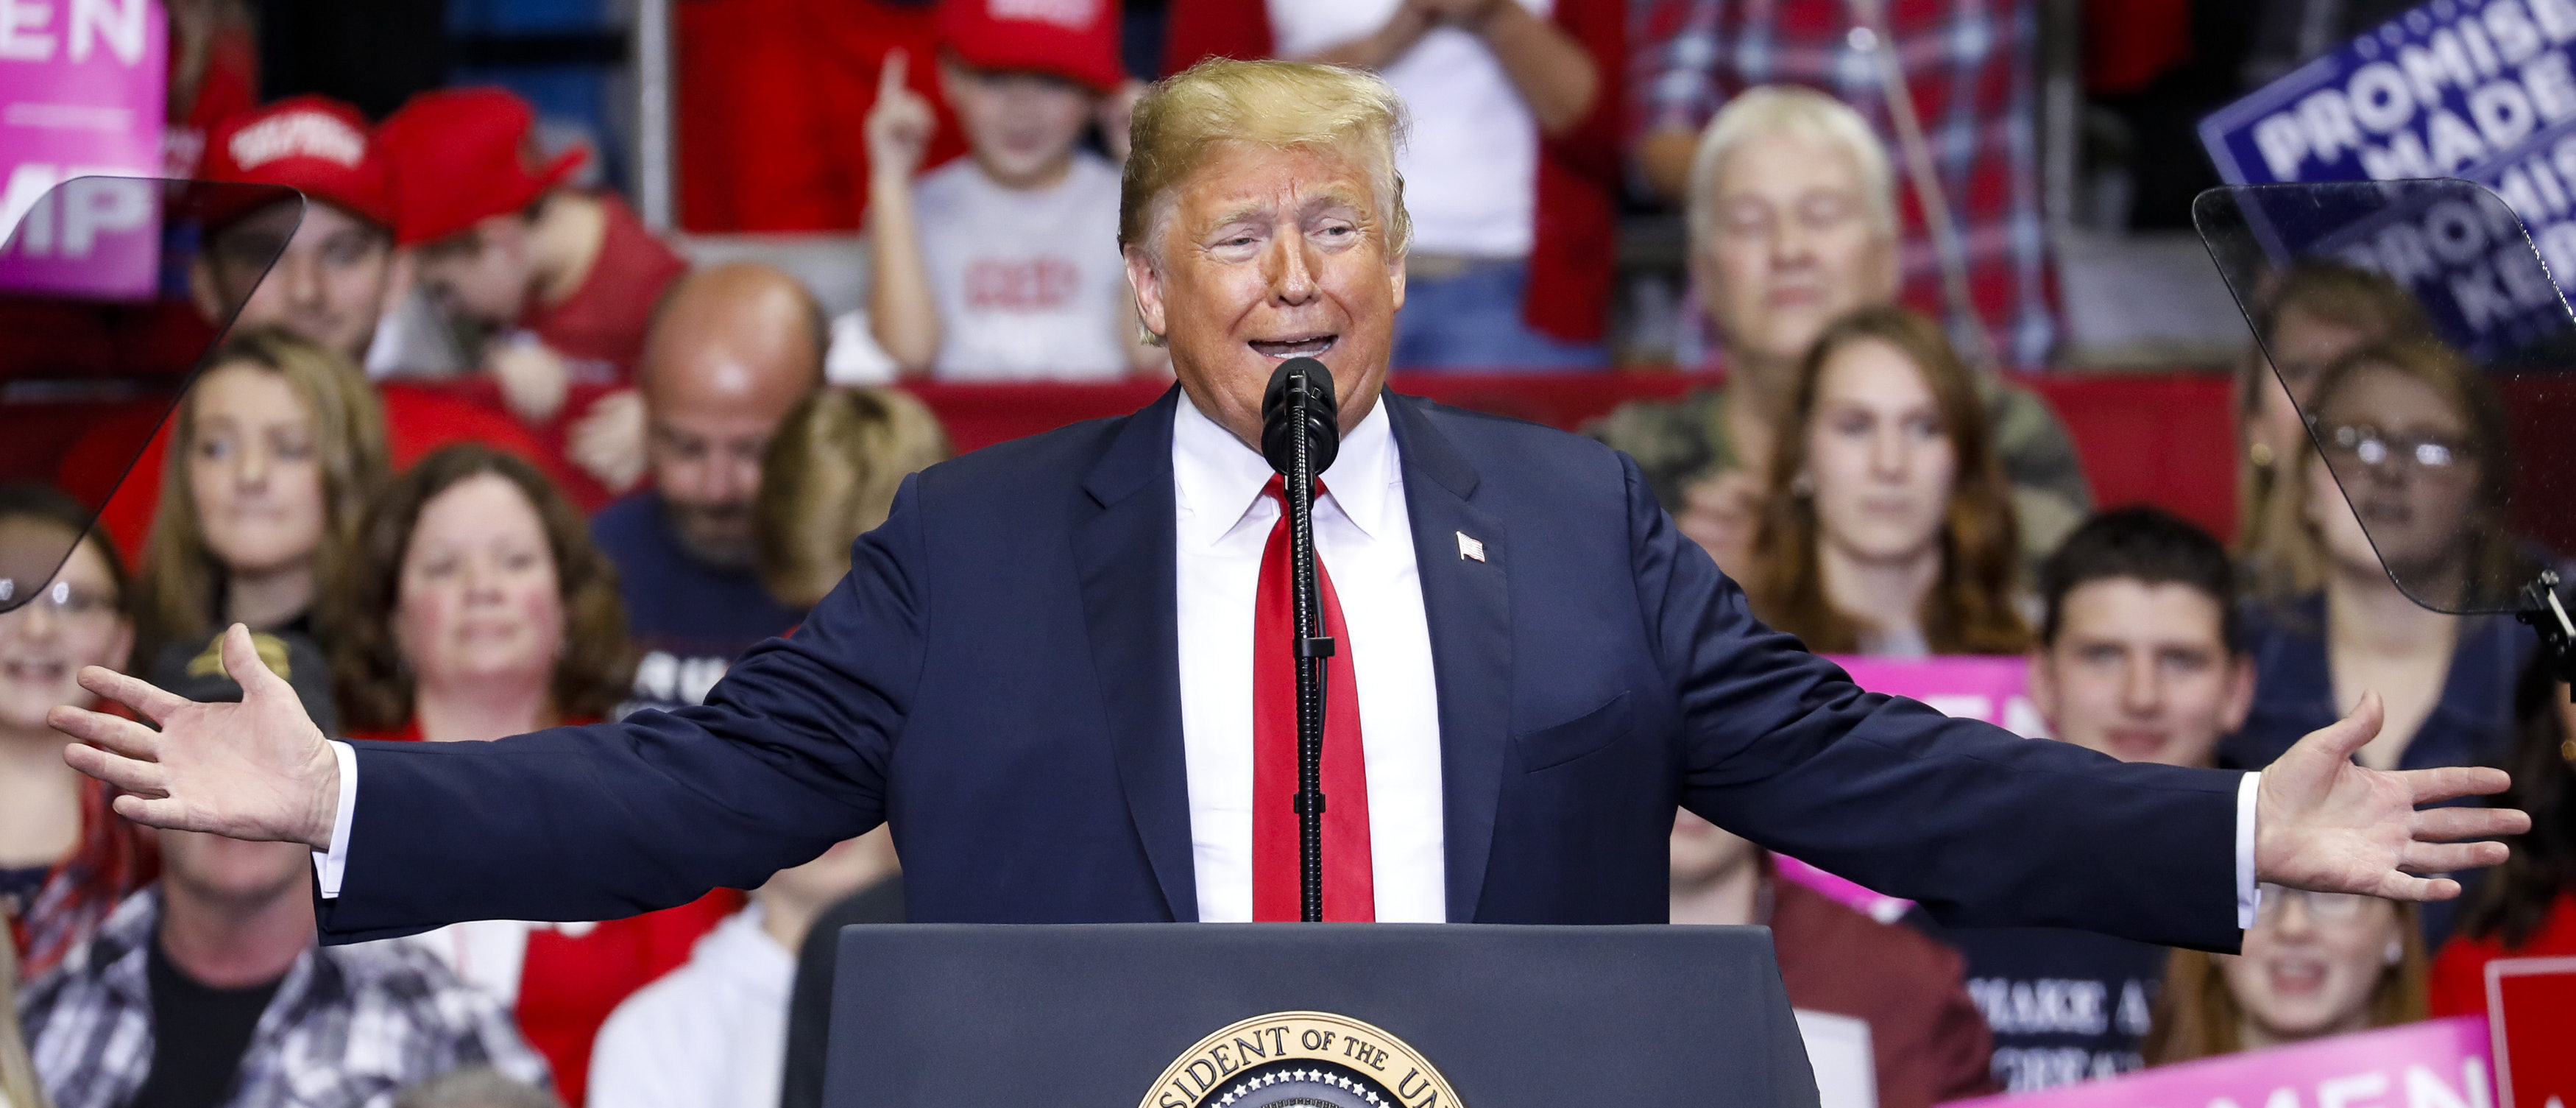 FORT WAYNE, IN - NOVEMBER 05: U.S. President Donald Trump speaks during a campaign rally for Republican Senate candidate Mike Braun at the County War Memorial Coliseum November 5, 2018 in Fort Wayne, Indiana. (Photo by Aaron P. Bernstein/Getty Images)